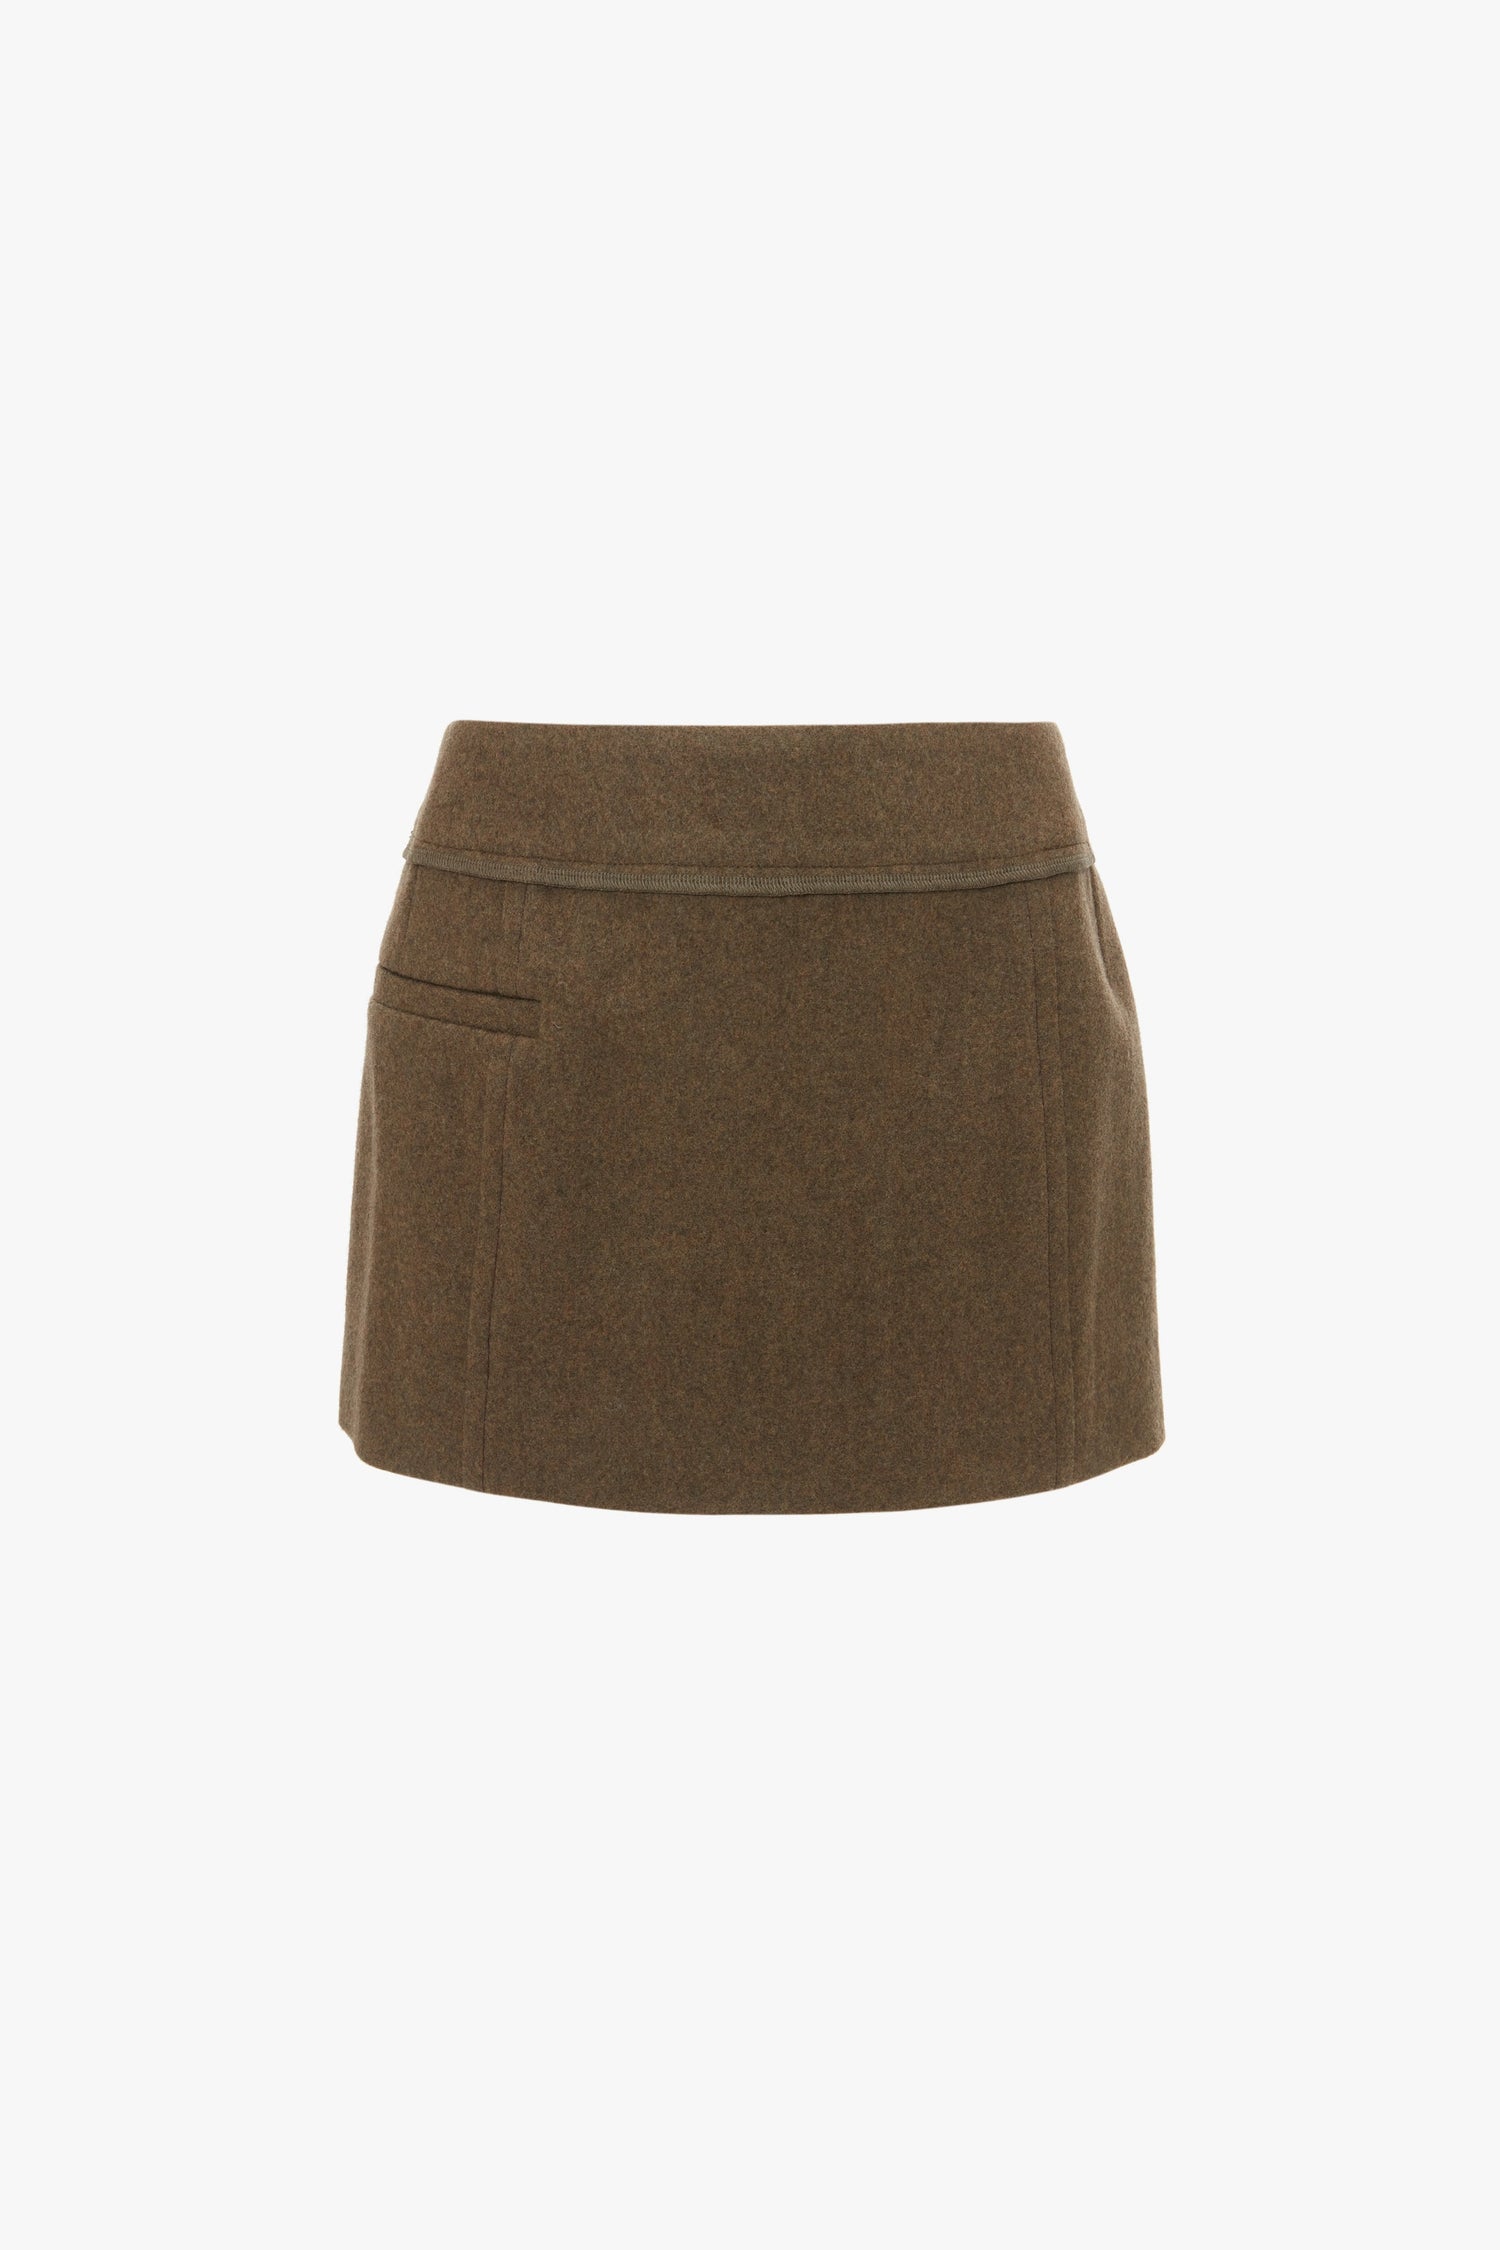 A Victoria Beckham Tailored Mini Skirt In Khaki, featuring a single side pocket and a plain front.